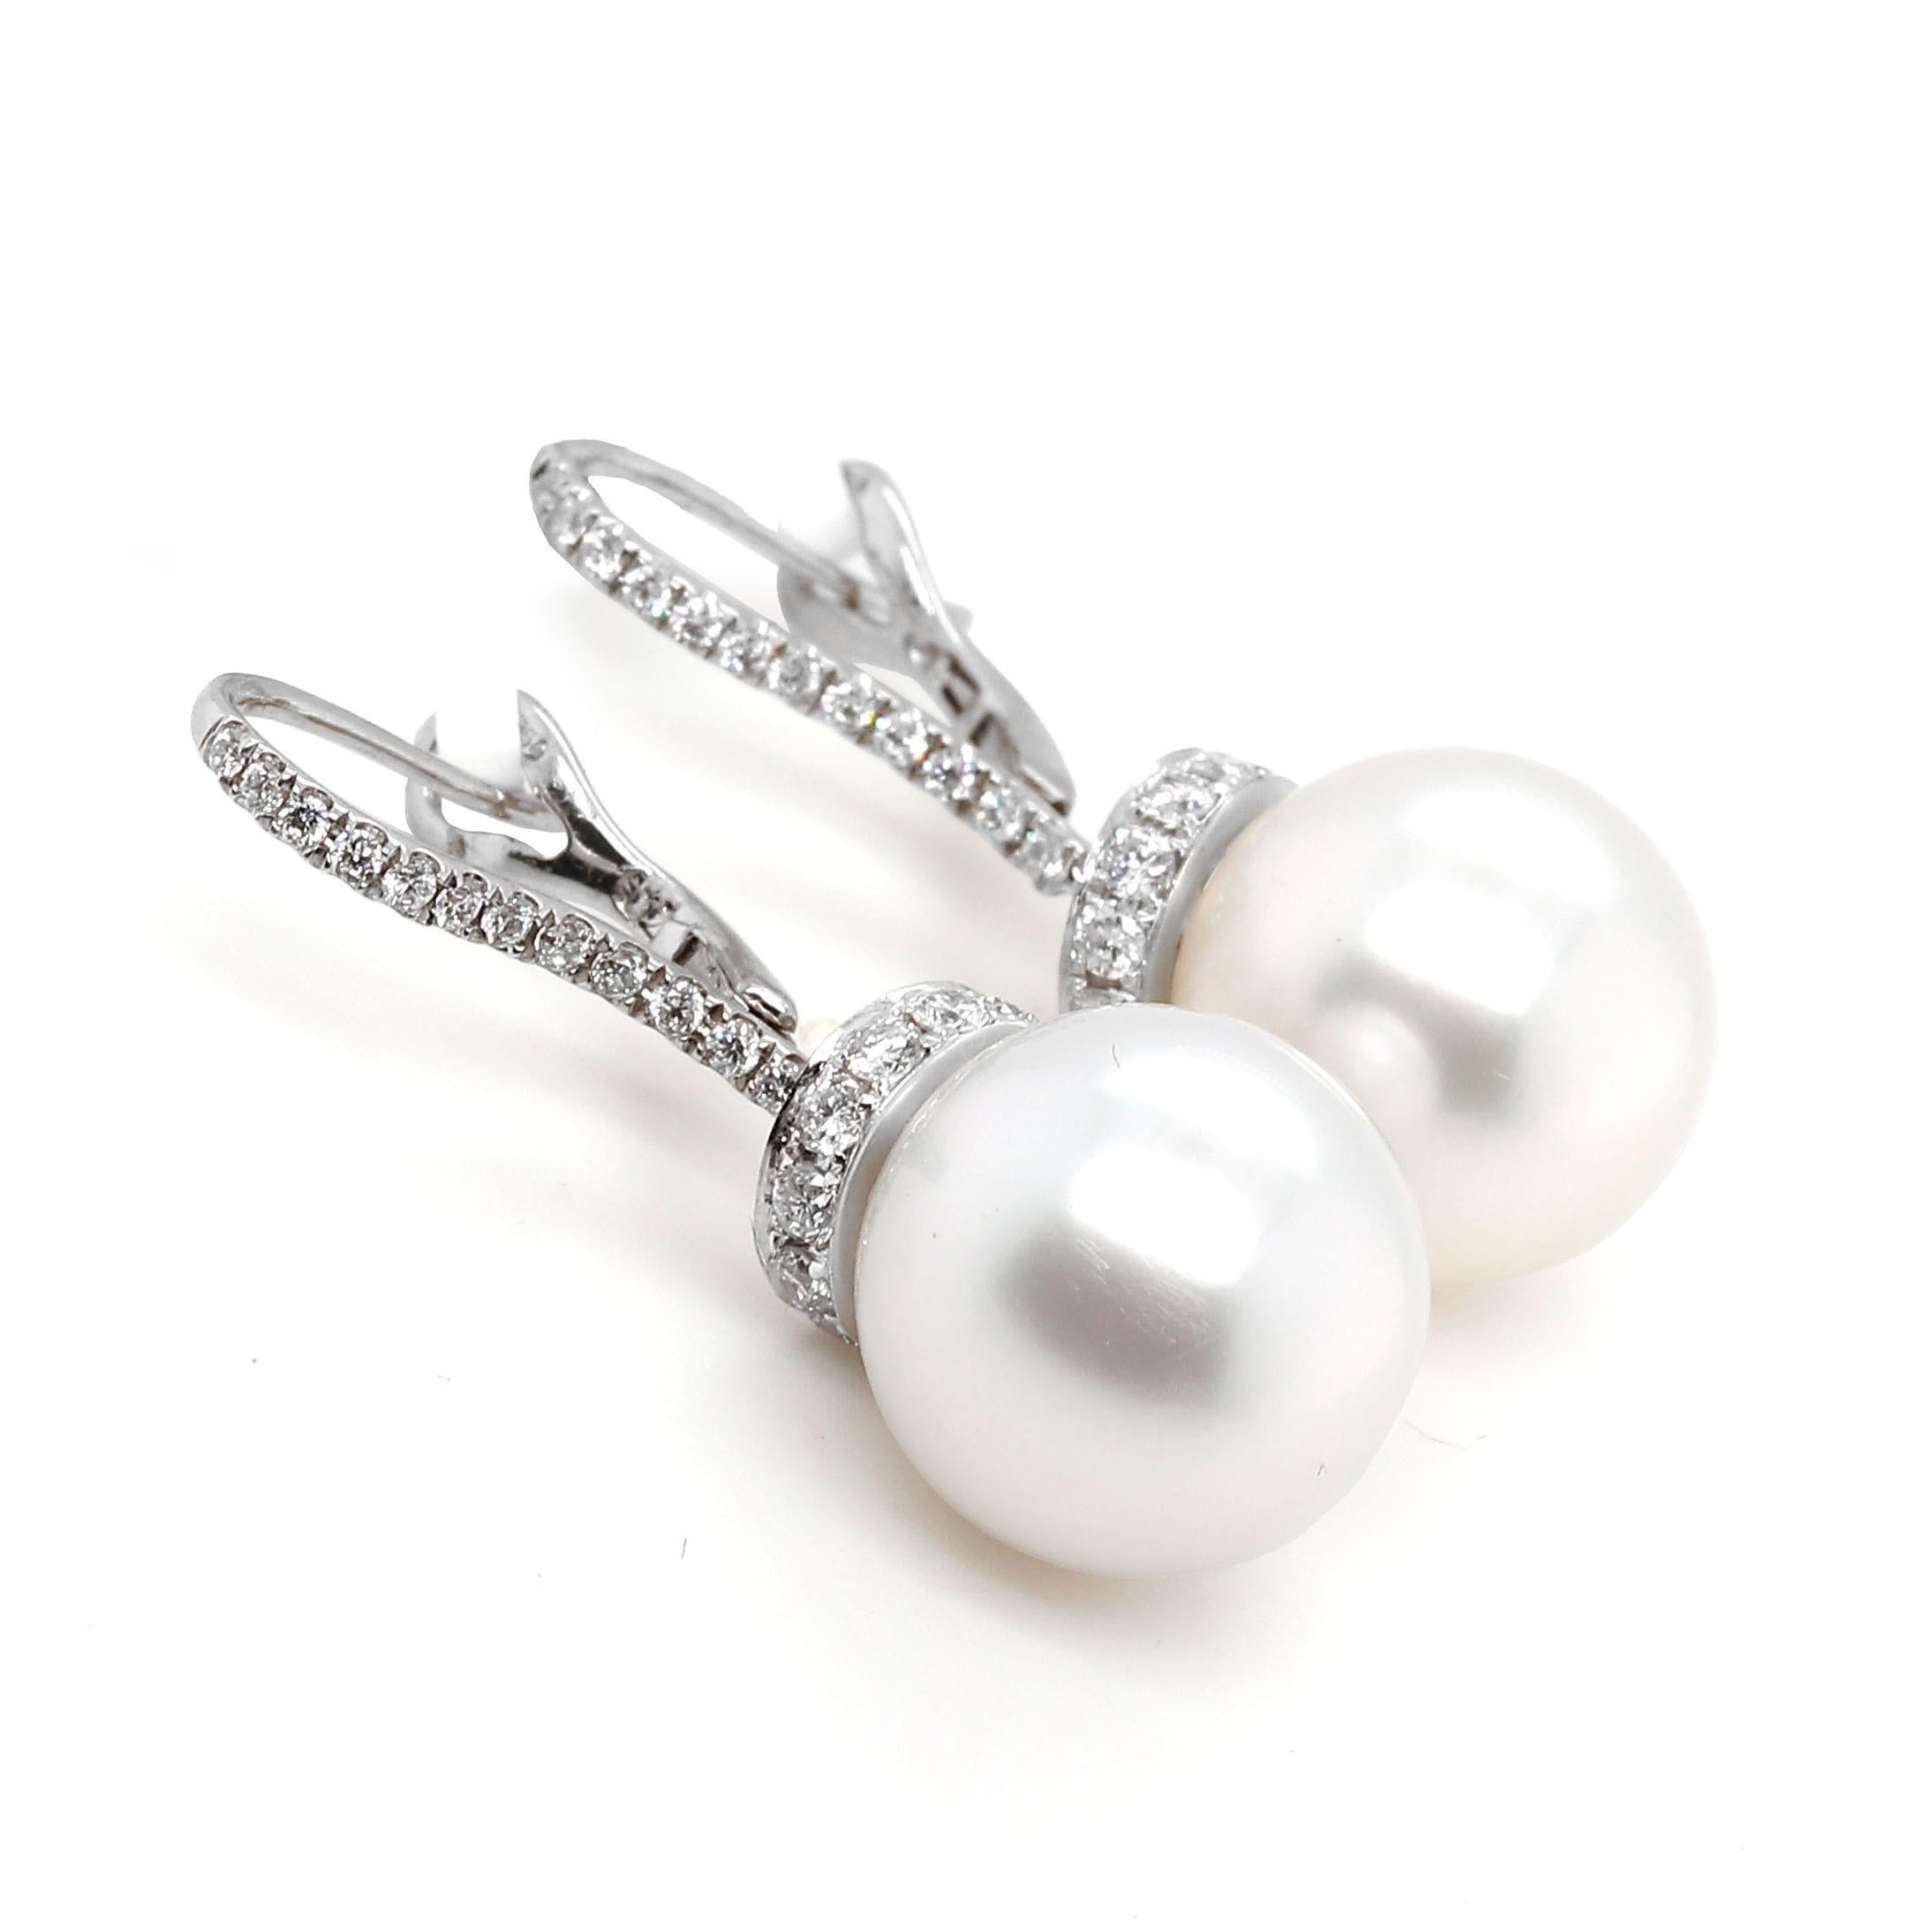 Earrings containing 2 natural South Sea Pearls of about 12.20mm and 48 round brilliant cut Diamonds of about 0.74 carats with a clarity of SI Color G. Al stones are set in a 14k white gold setting. The total weight of the earrings is approximately